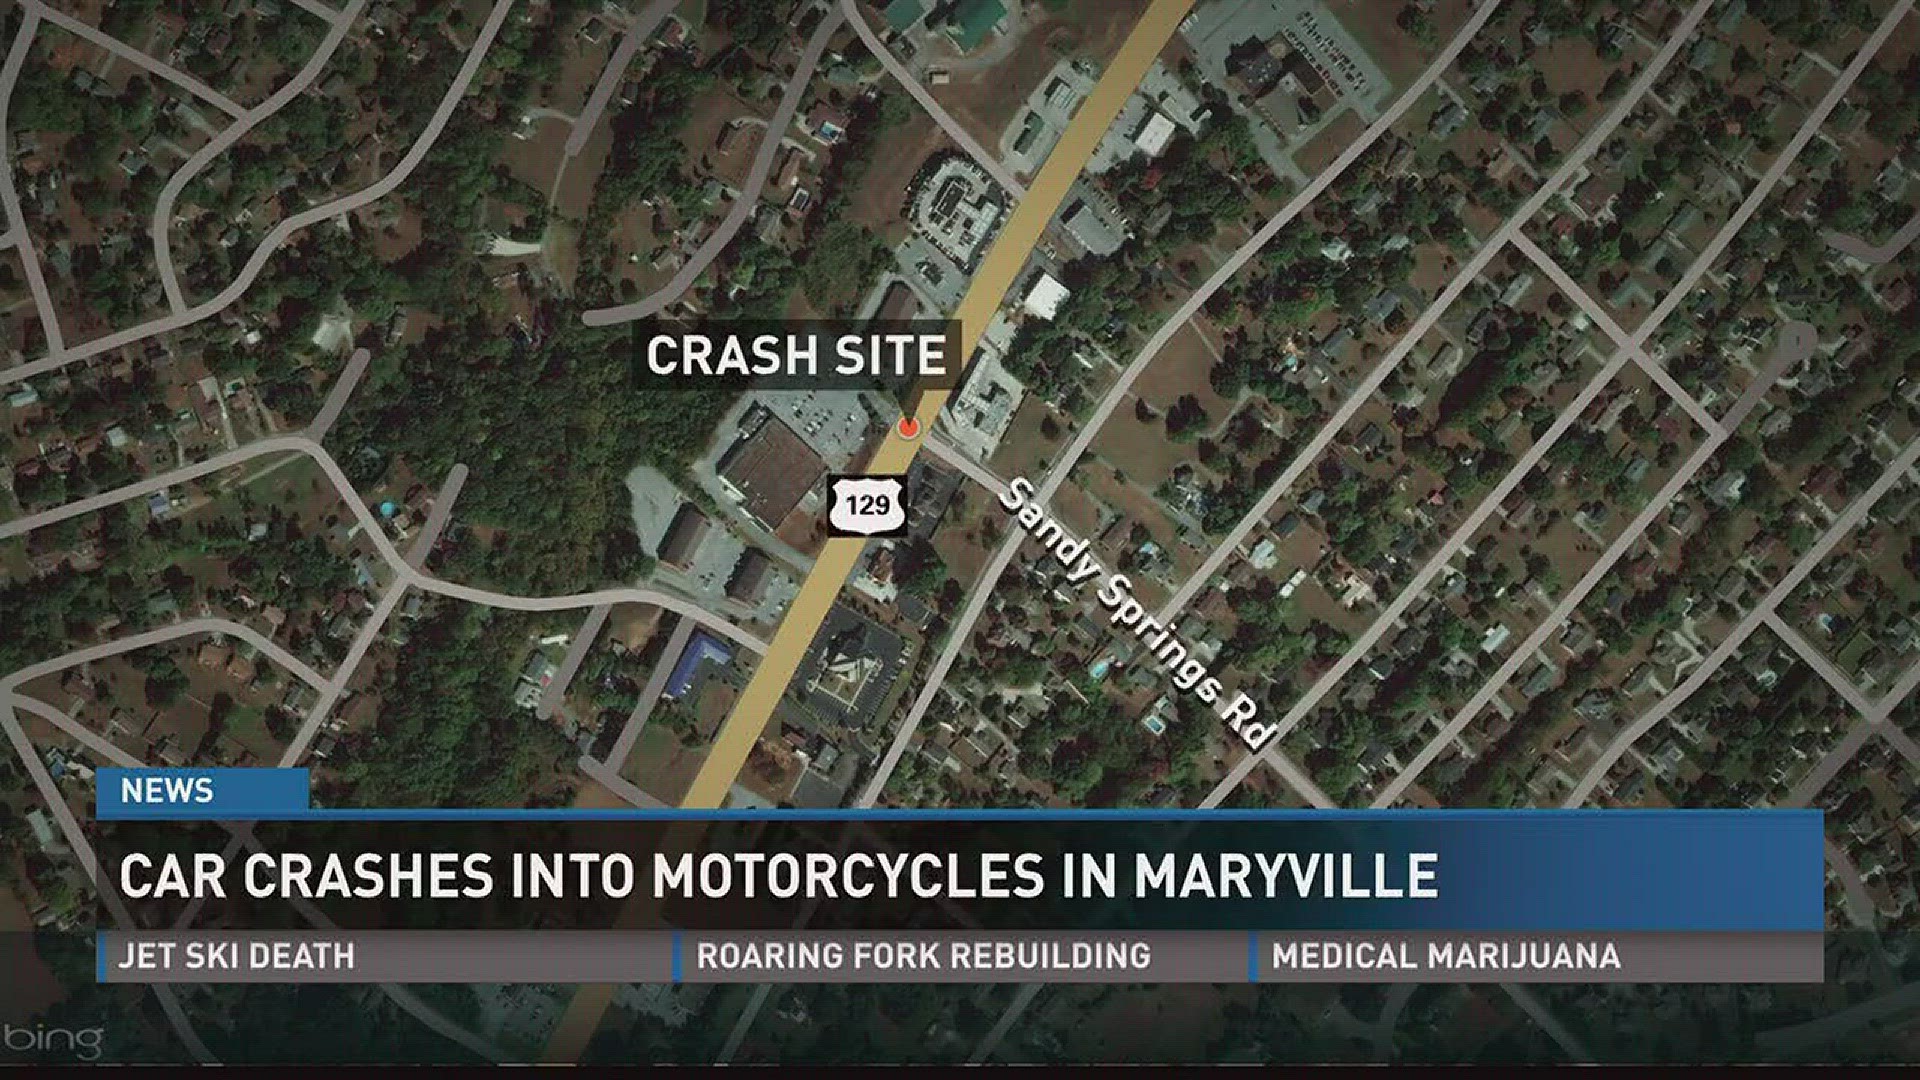 Blount County dispatch confirmed a car crashed into motorcyclists Sunday afternoon.